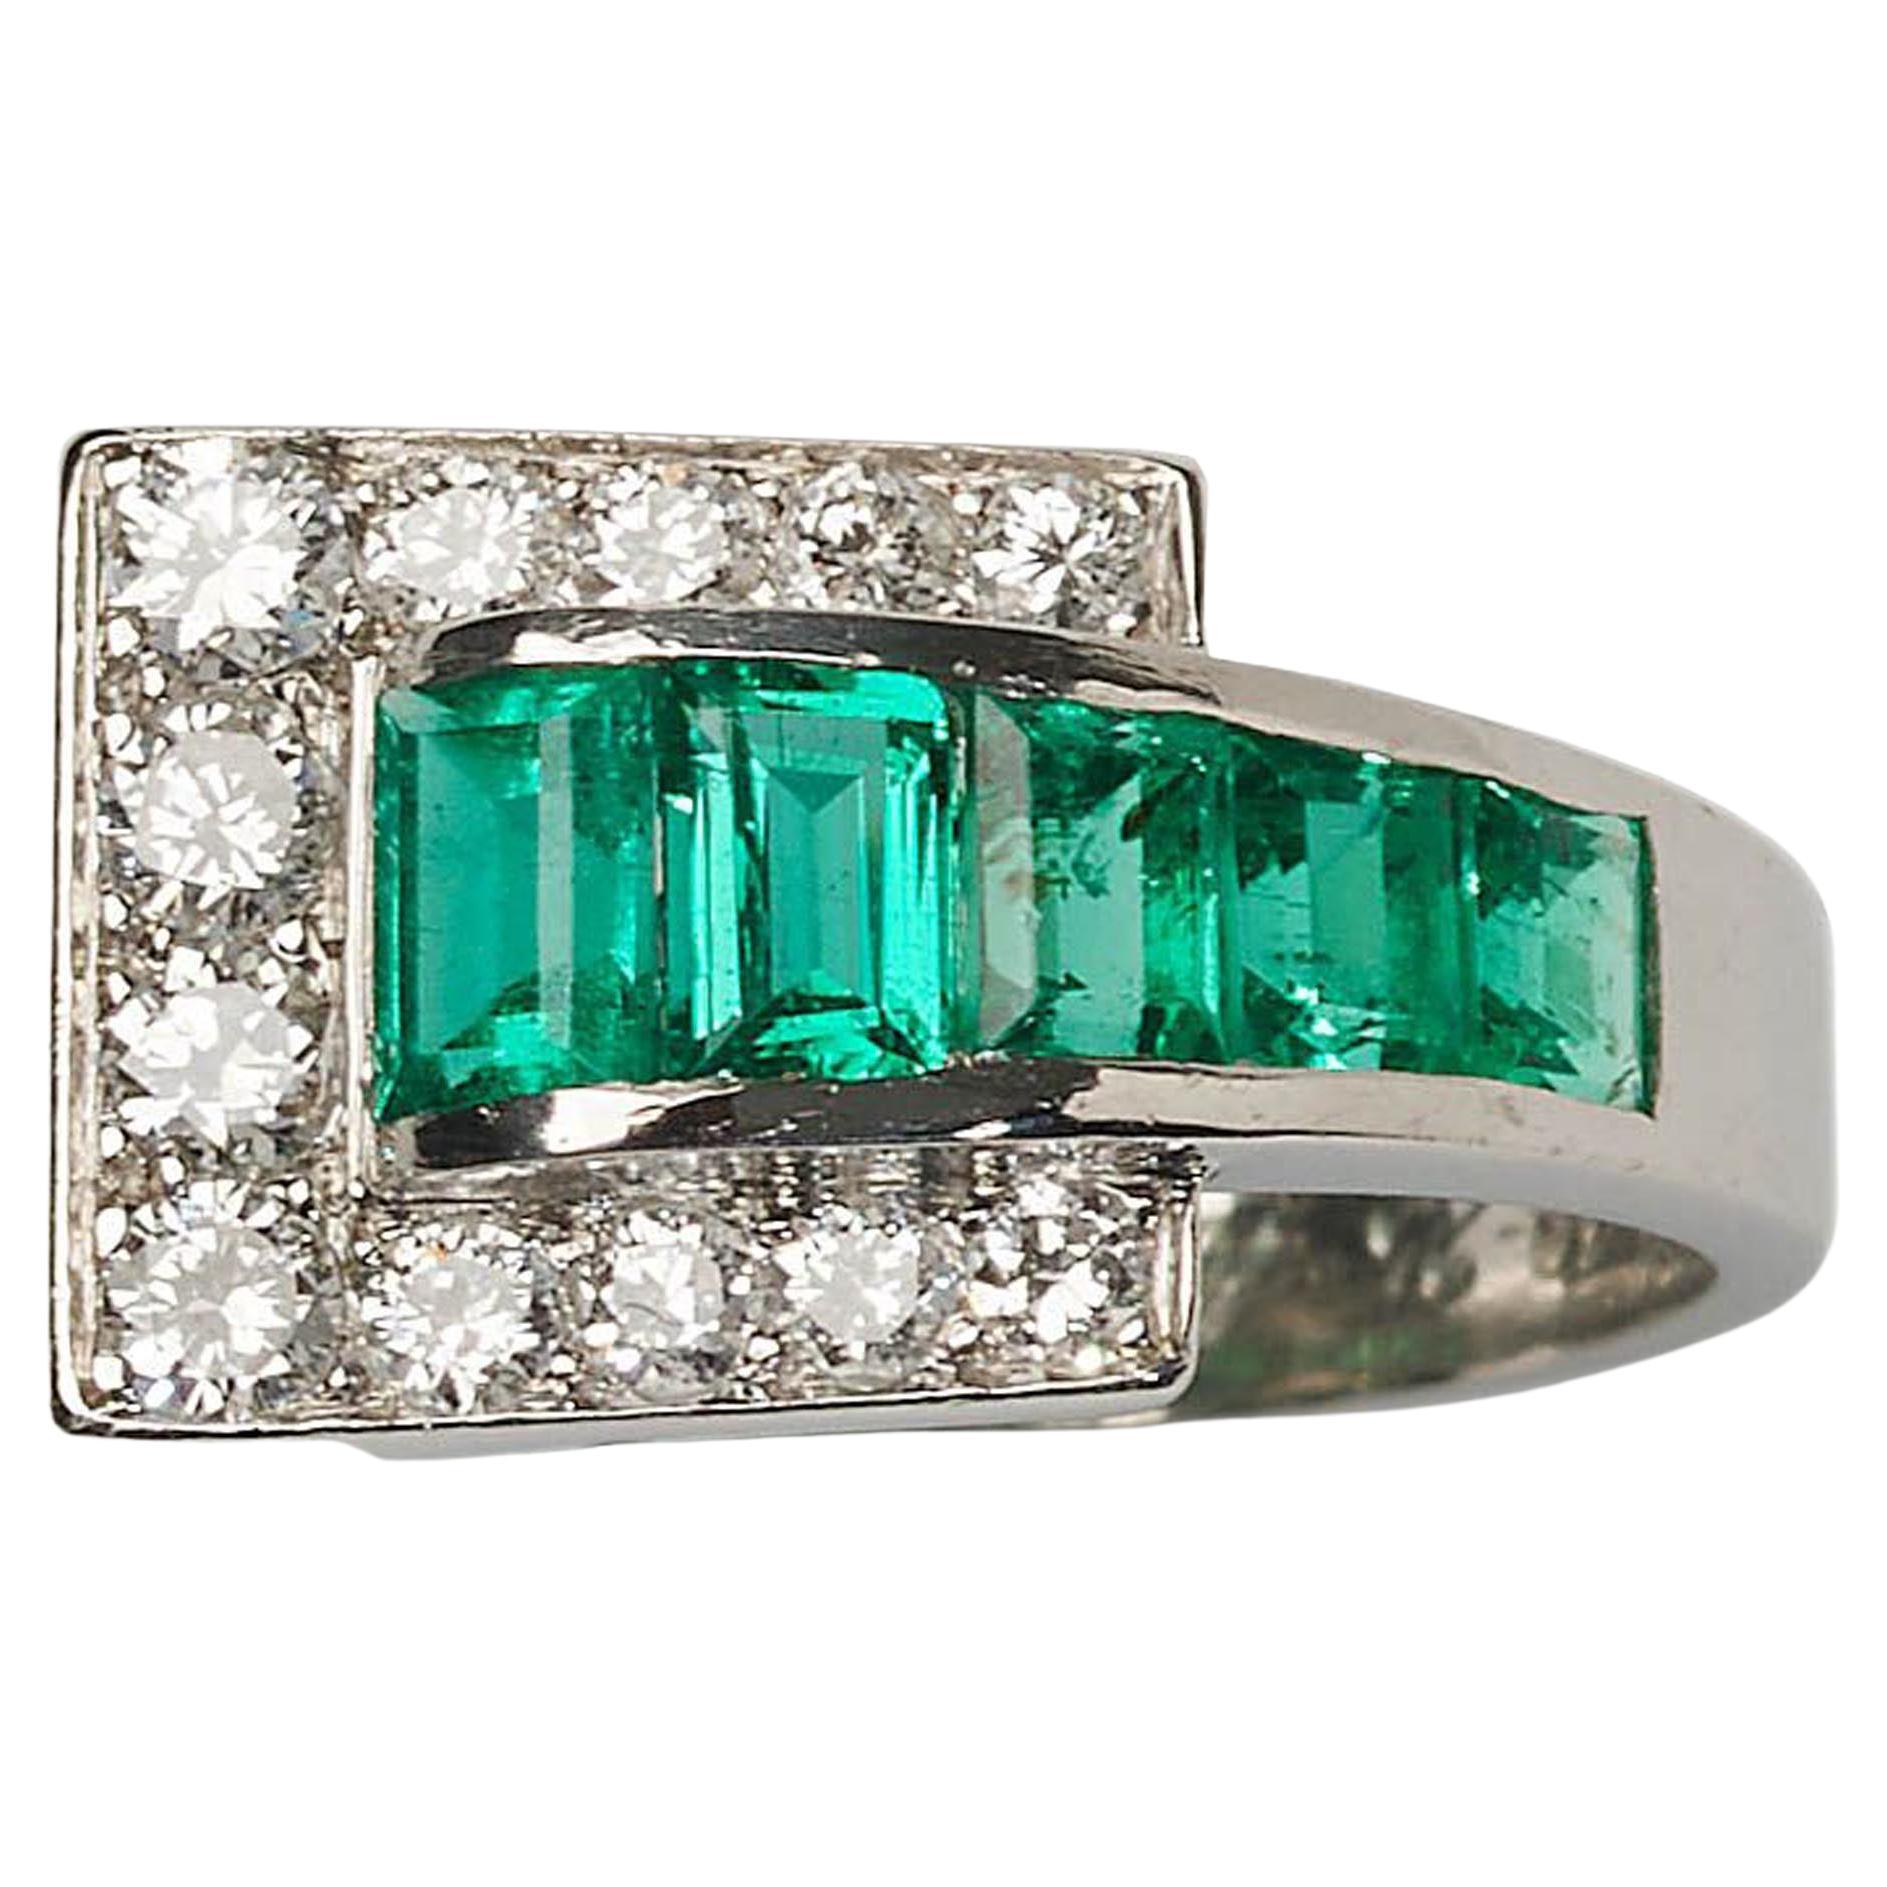 Vintage Tiffany & Co. Emerald, Diamond and Platinum Tank Ring, Dated 1940 For Sale